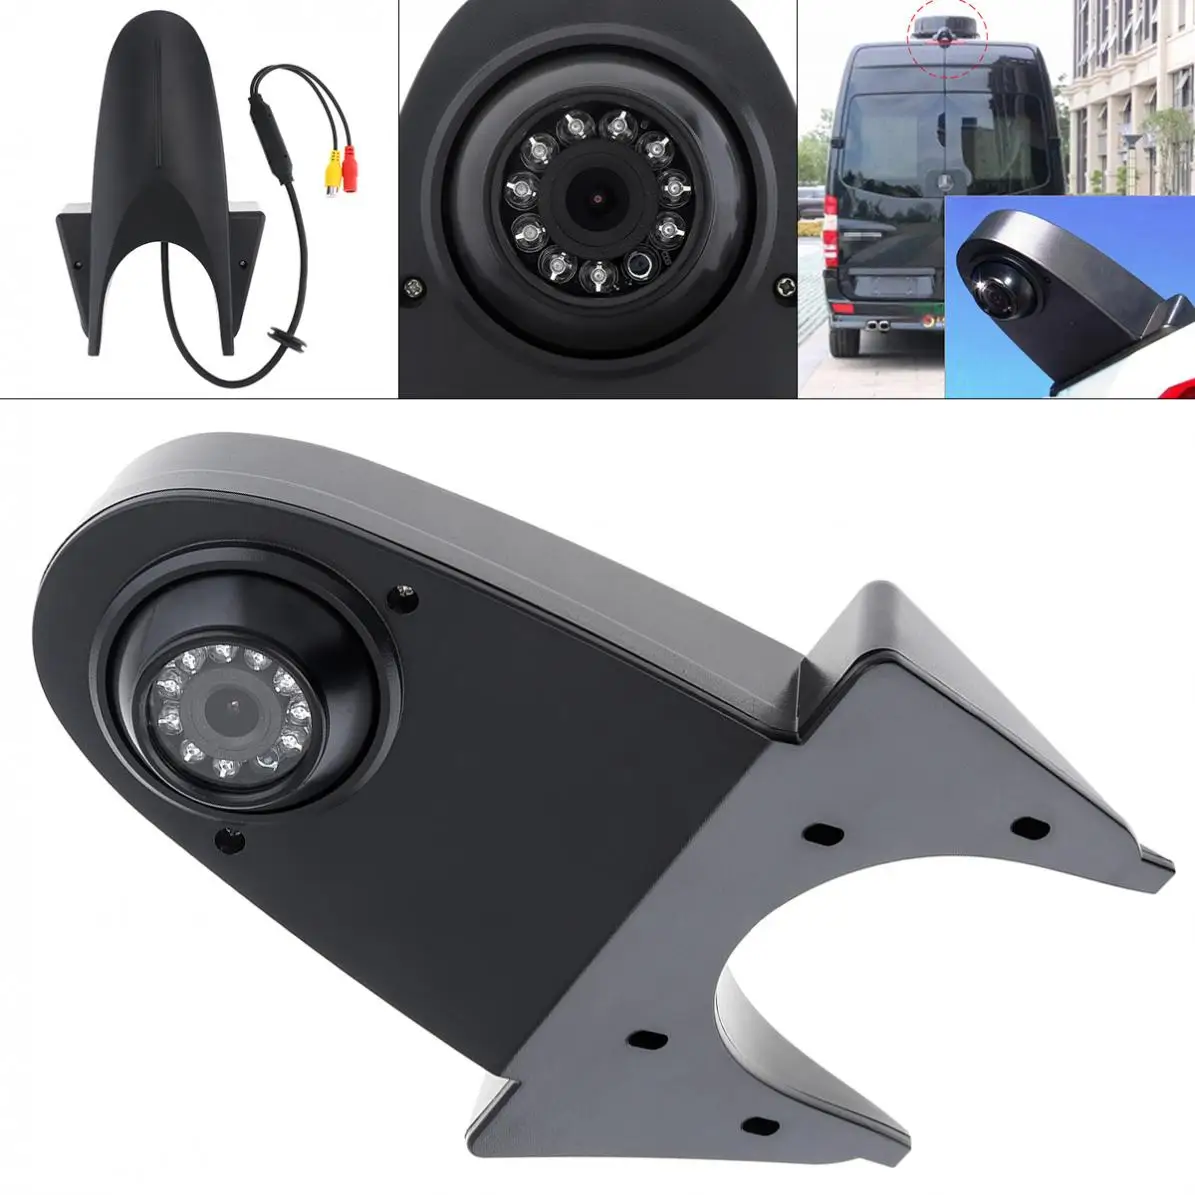 

12V 1W Universal 170° Wide Angle Car Rear View Camera Night Vision Auto Rear Side Reverse Infrared Camera